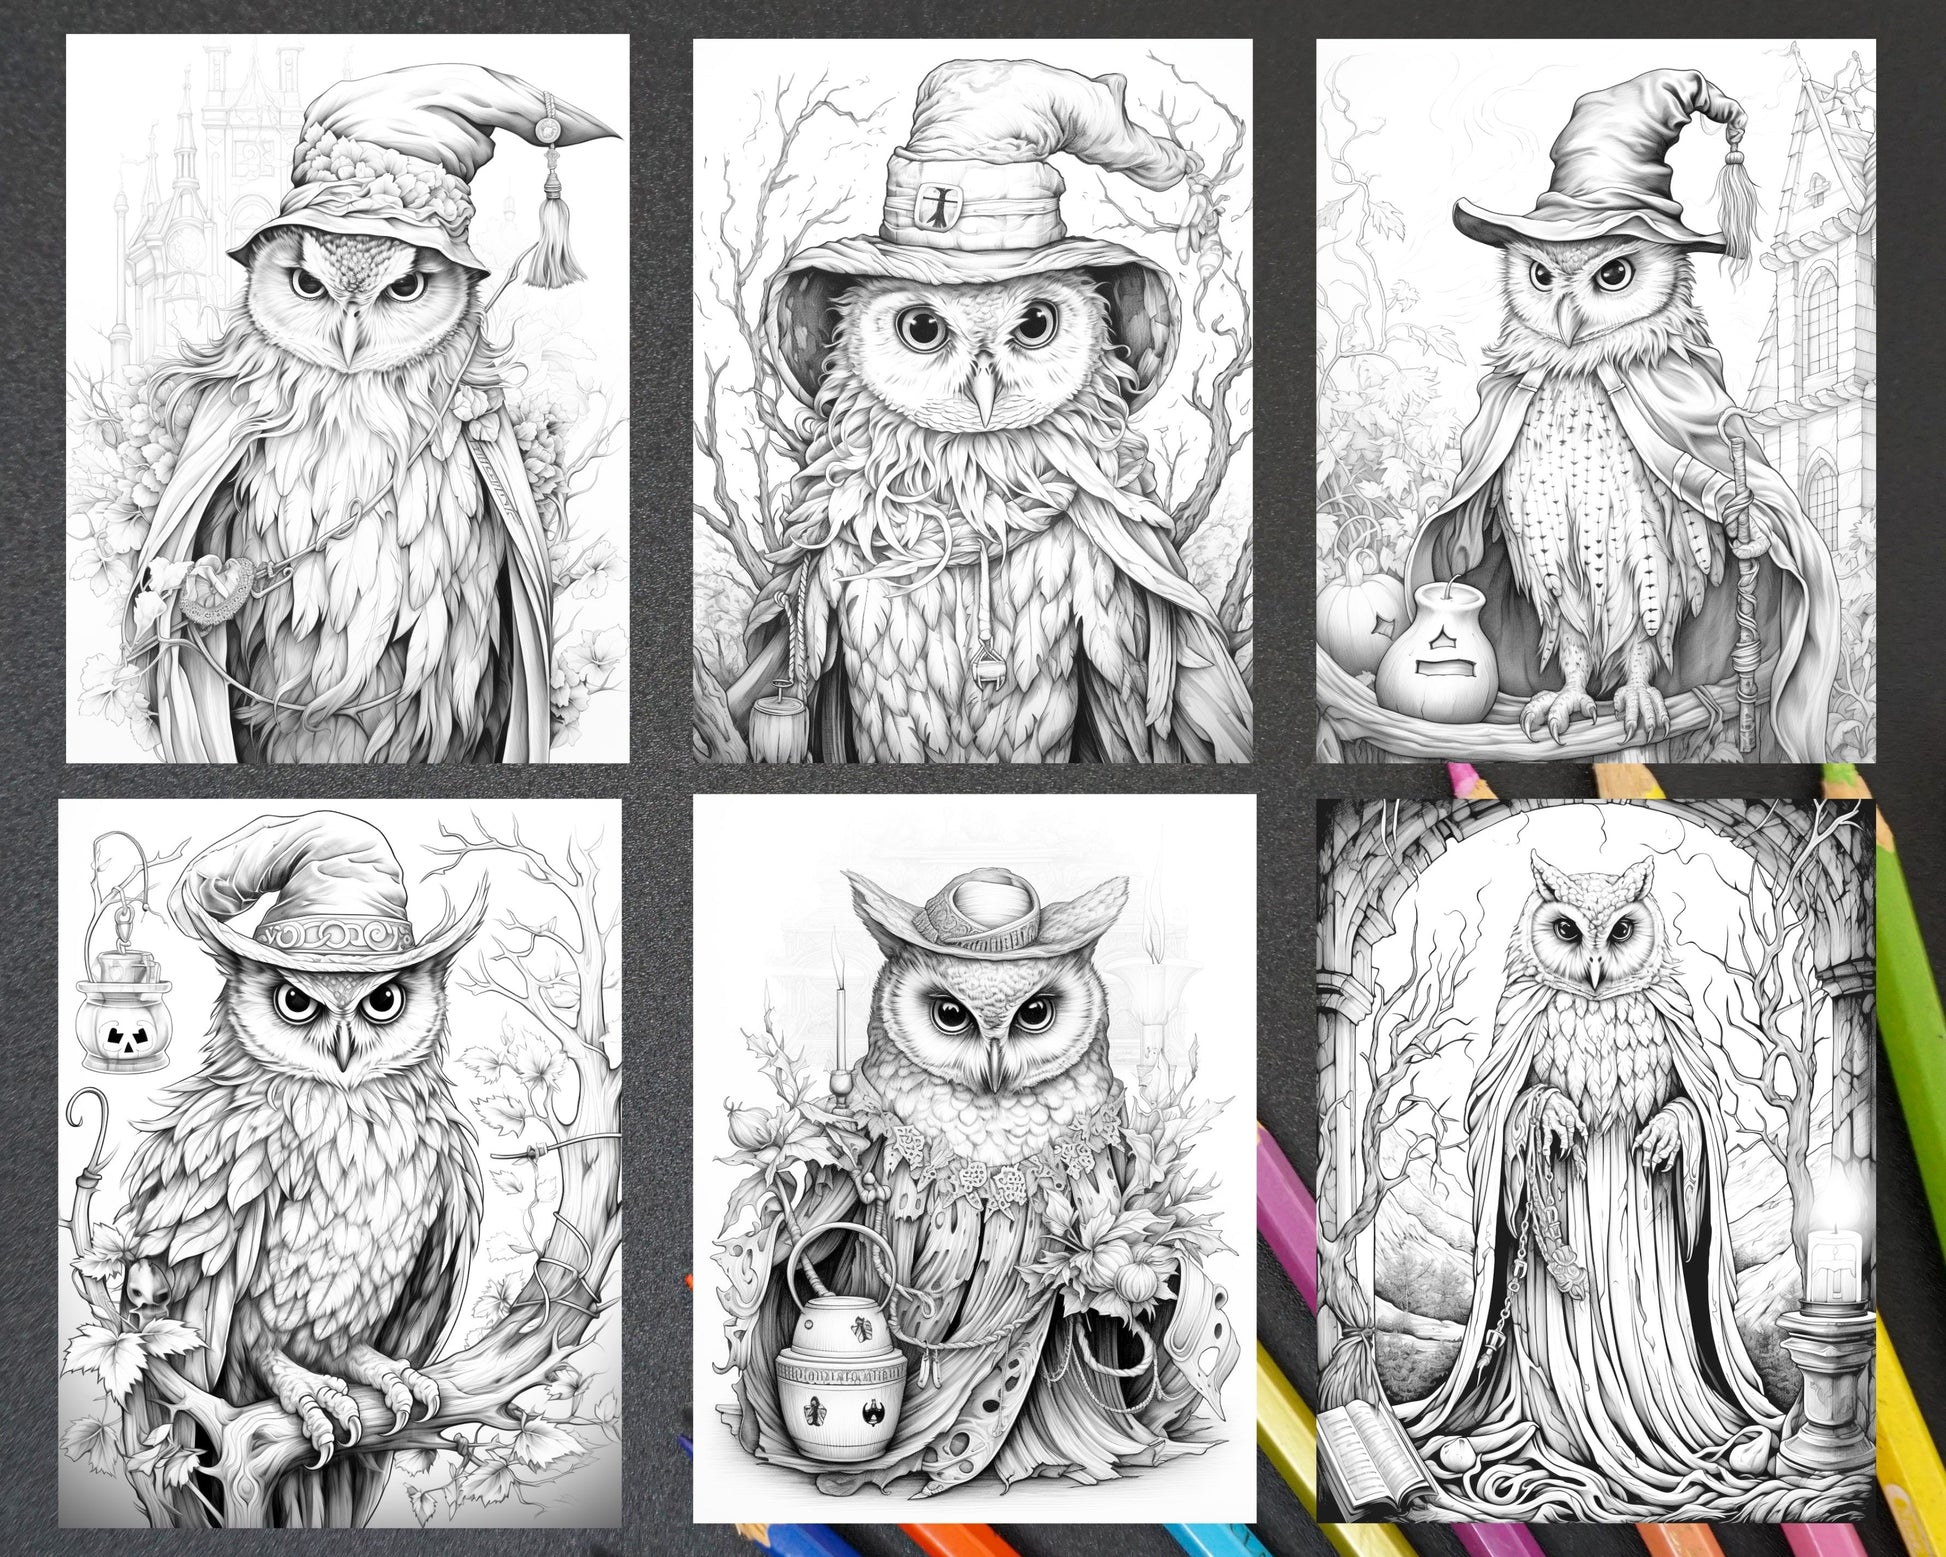 Halloween Witch Owl Grayscale Coloring Pages, Printable Coloring Sheets for Adults and Kids, Instant Download Halloween Coloring Book, Witchcraft Theme Spooky Owl Coloring